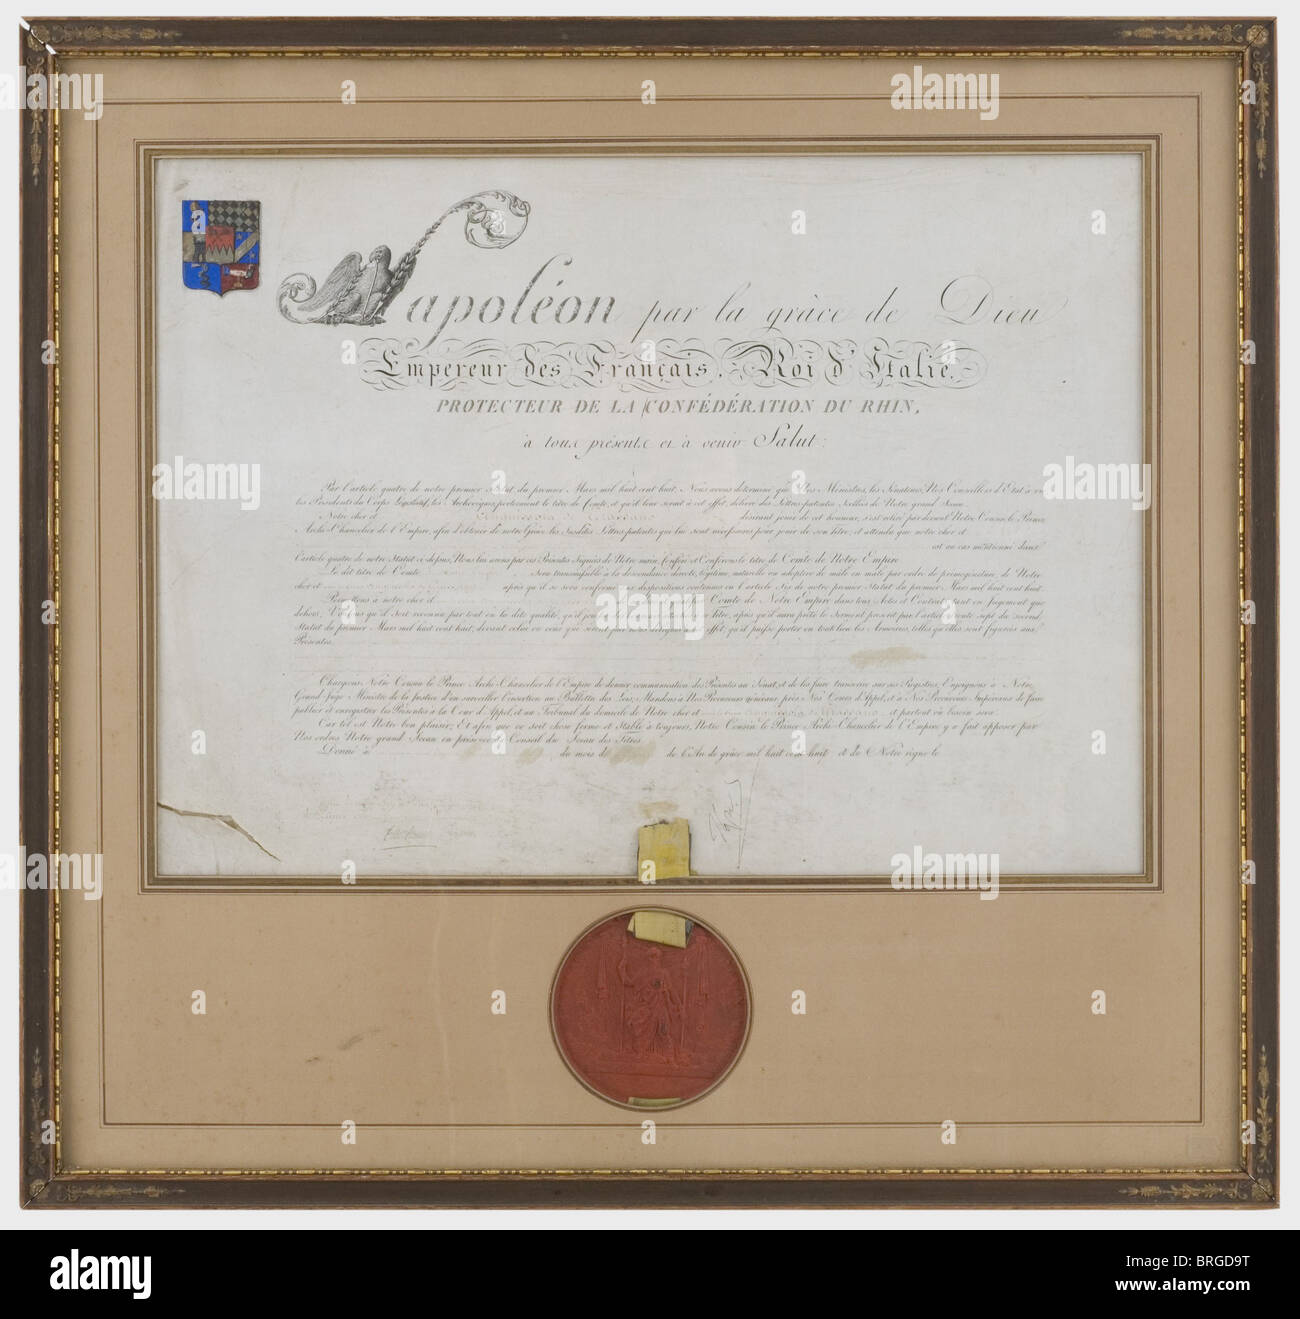 Emperor Napoleon I, the great patent of nobility for Fran‡ois Anguissola de Grassano The award of the title of Count 'Anguissola de Grassano' to the imperial senator, presented at Schönbrunn on 29 September 1809. Autograph signature in dark ink 'Napol' and the signature of Chancellor Cambacères. Large format parchment certificate with a red wax seal set in the centre bearing a portrait of Napoleon and surrounded by the inscription, 'Napoleon Empereur des Fran‡ais'. The noble's coat of arms is hand painted in the upper left corner. The handwritten entries have f, Stock Photo